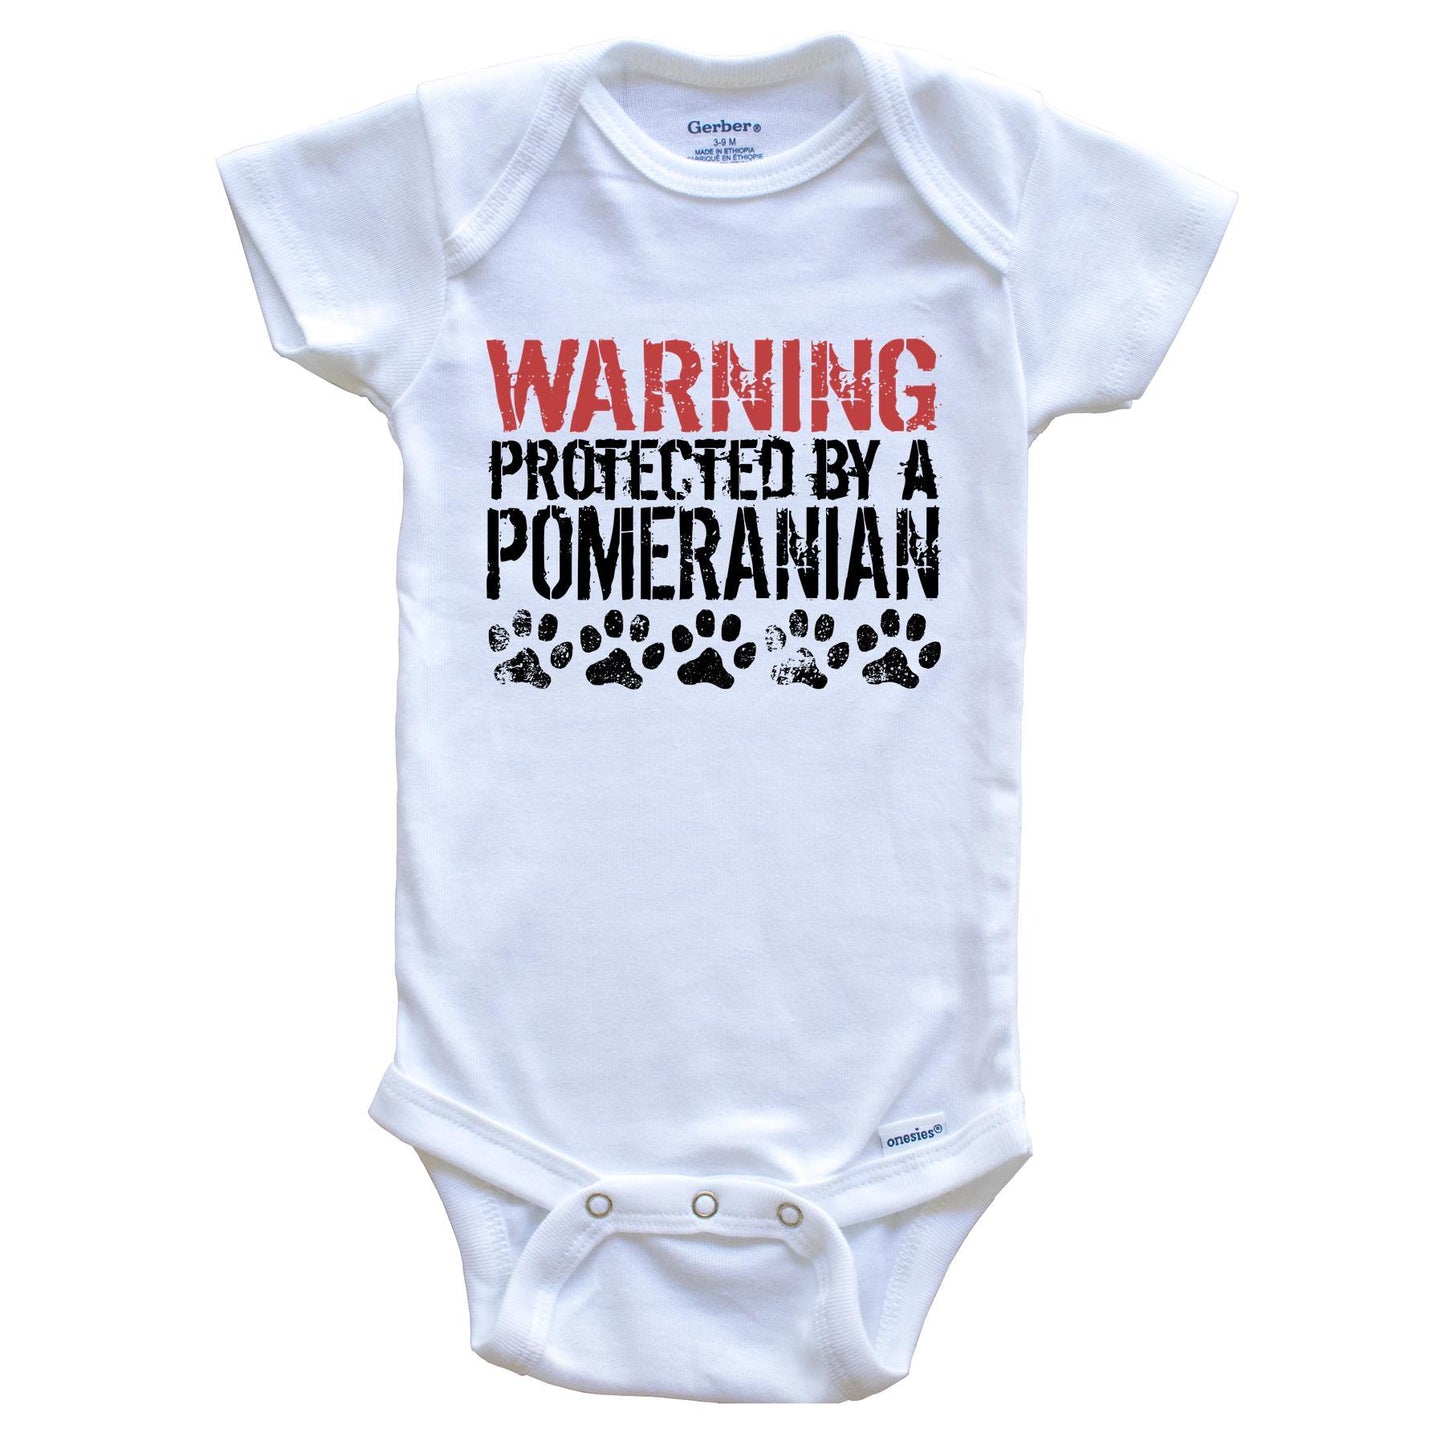 Warning Protected By A Pomeranian Baby Onesie